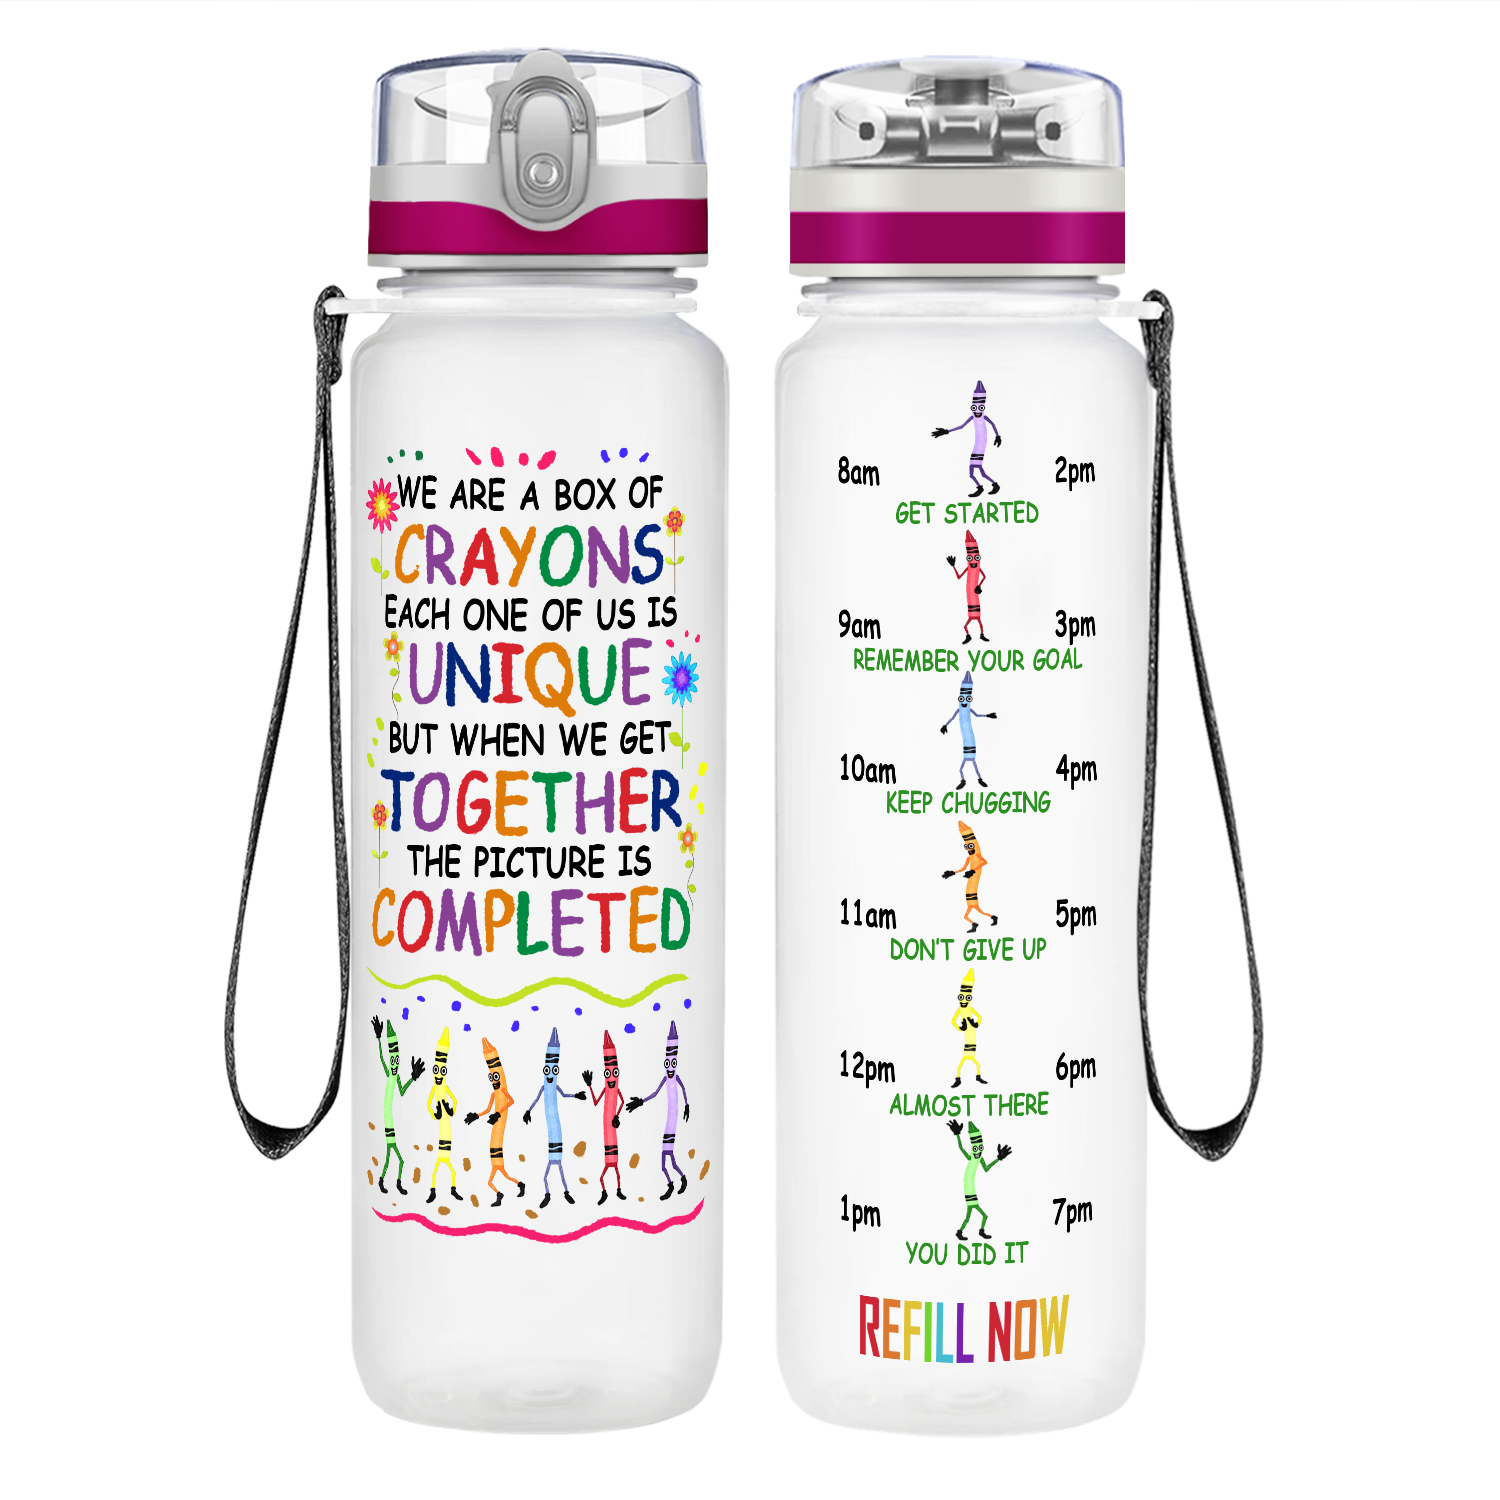 We are a Box of Crayons on 32 oz Motivational Tracking Teacher Water Bottle